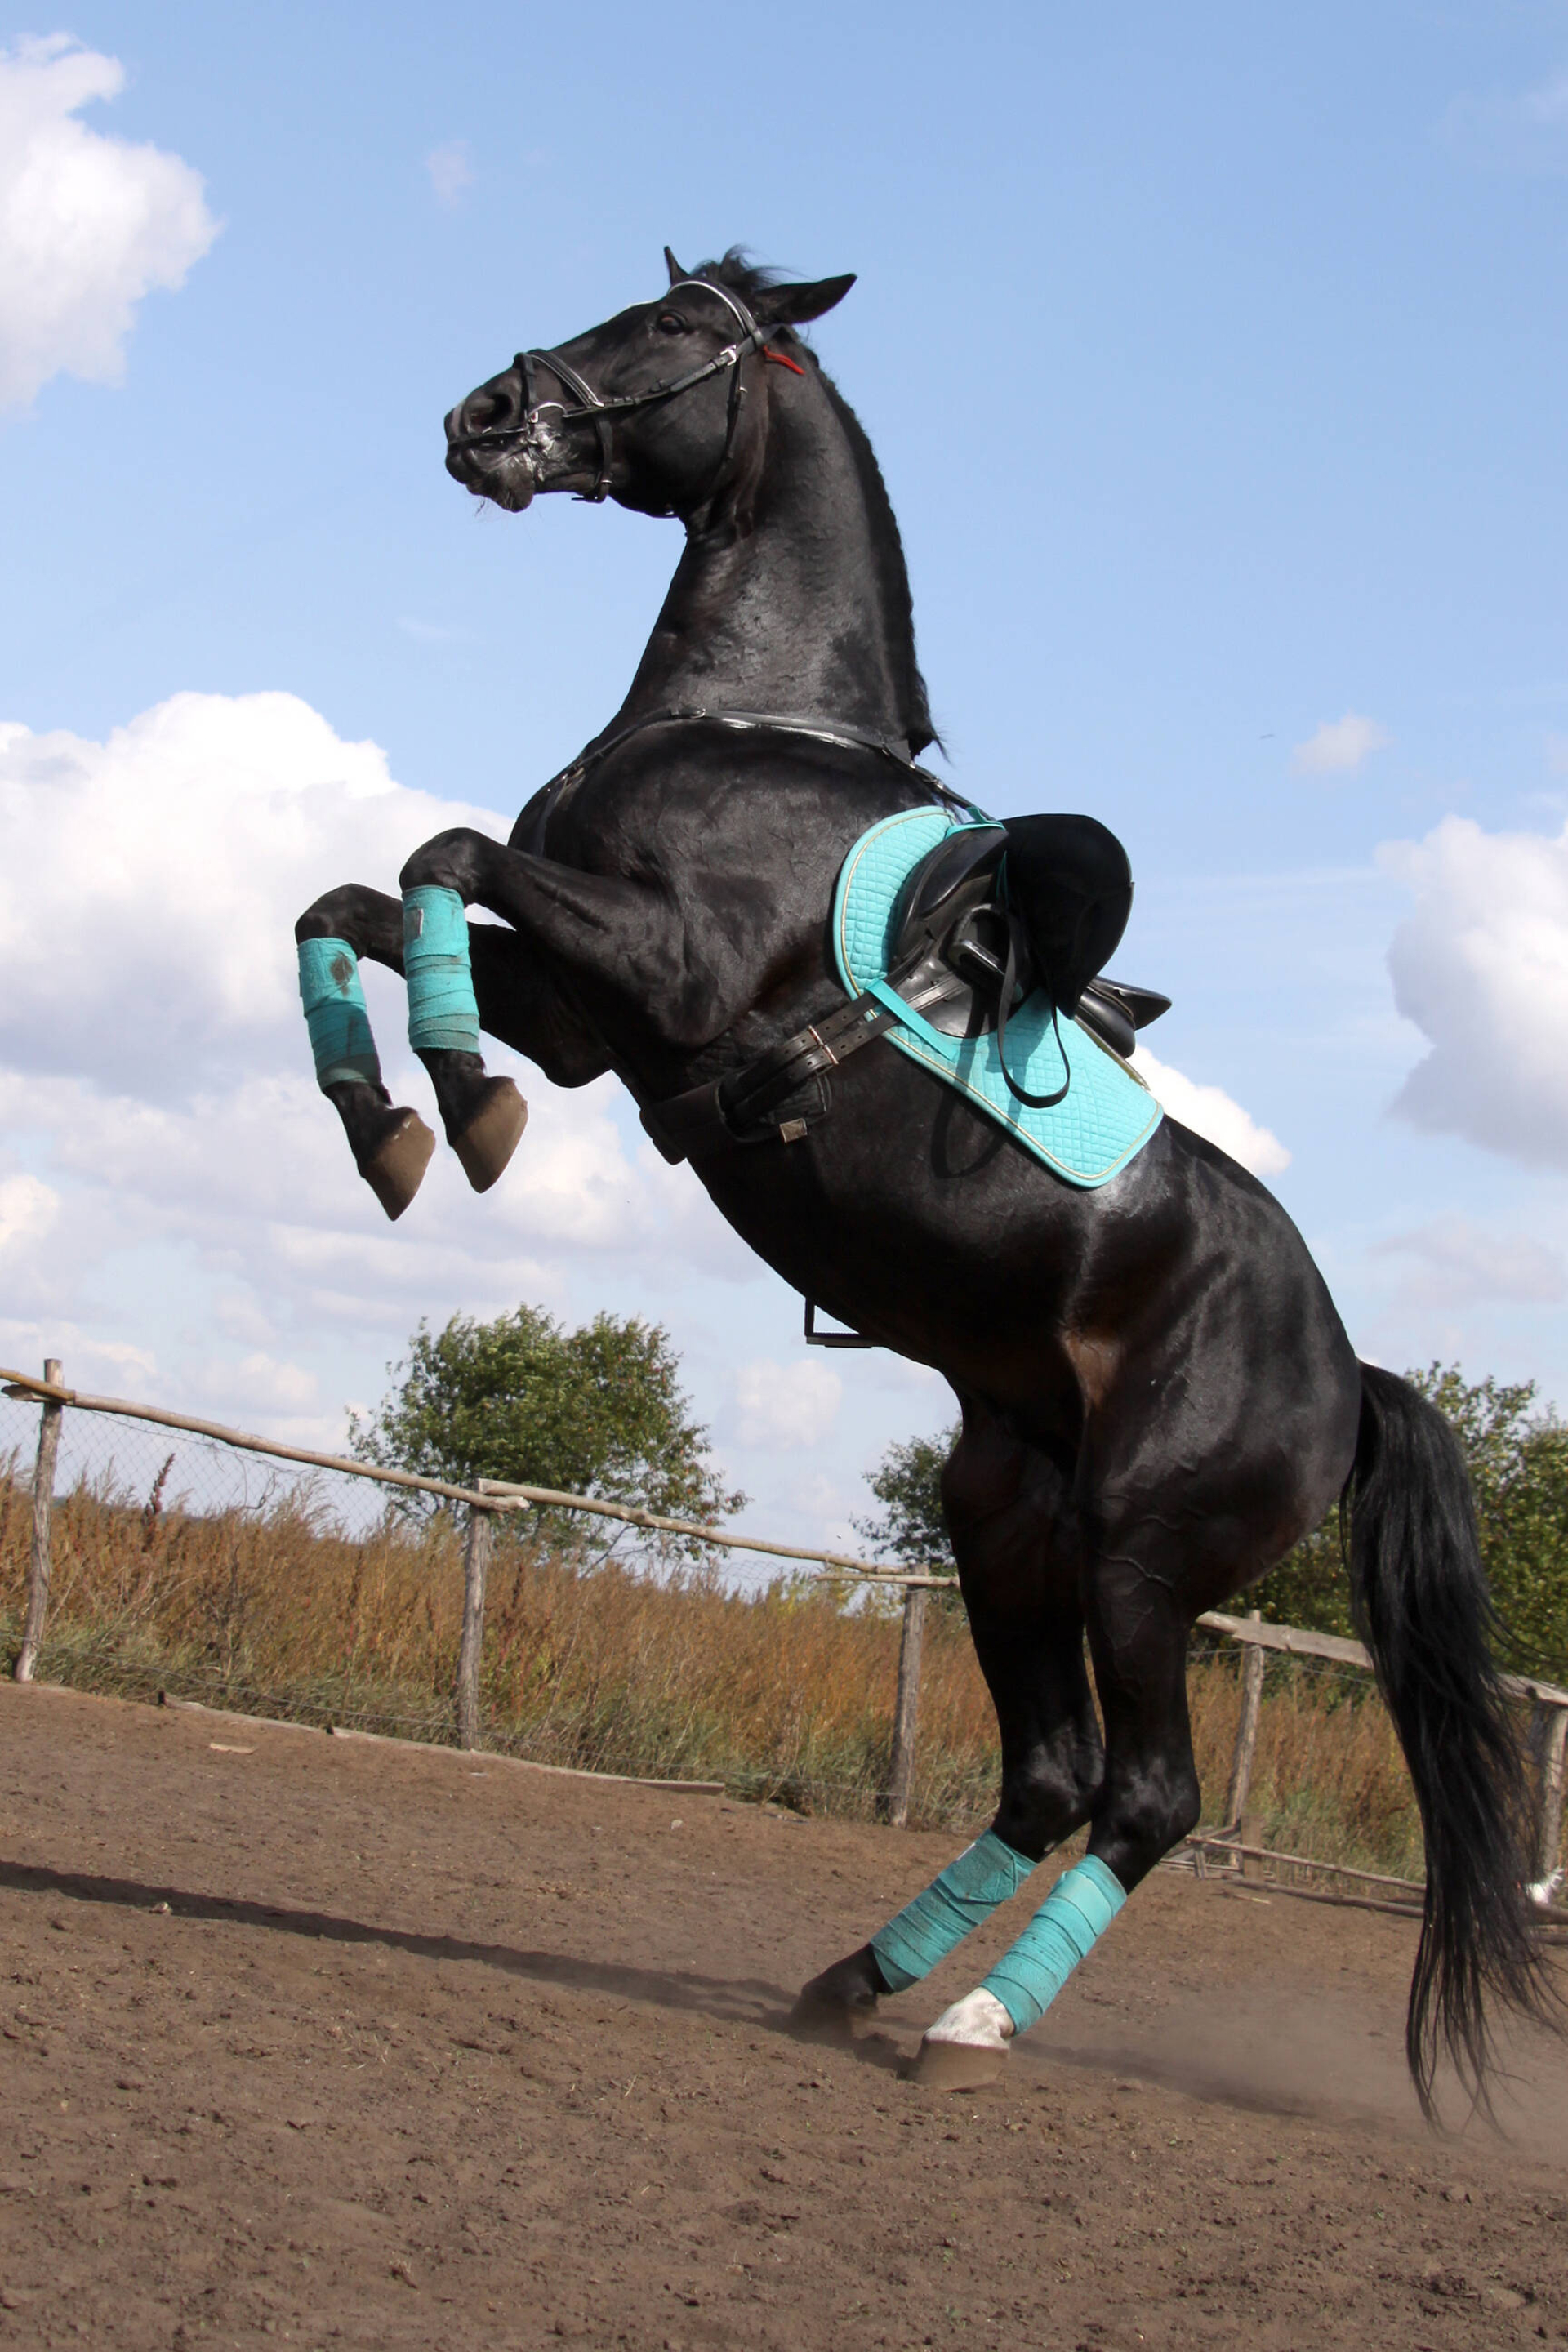 Equestrian Sports: The well-trained black horse reared up, A racing horse. 1920x2880 HD Background.